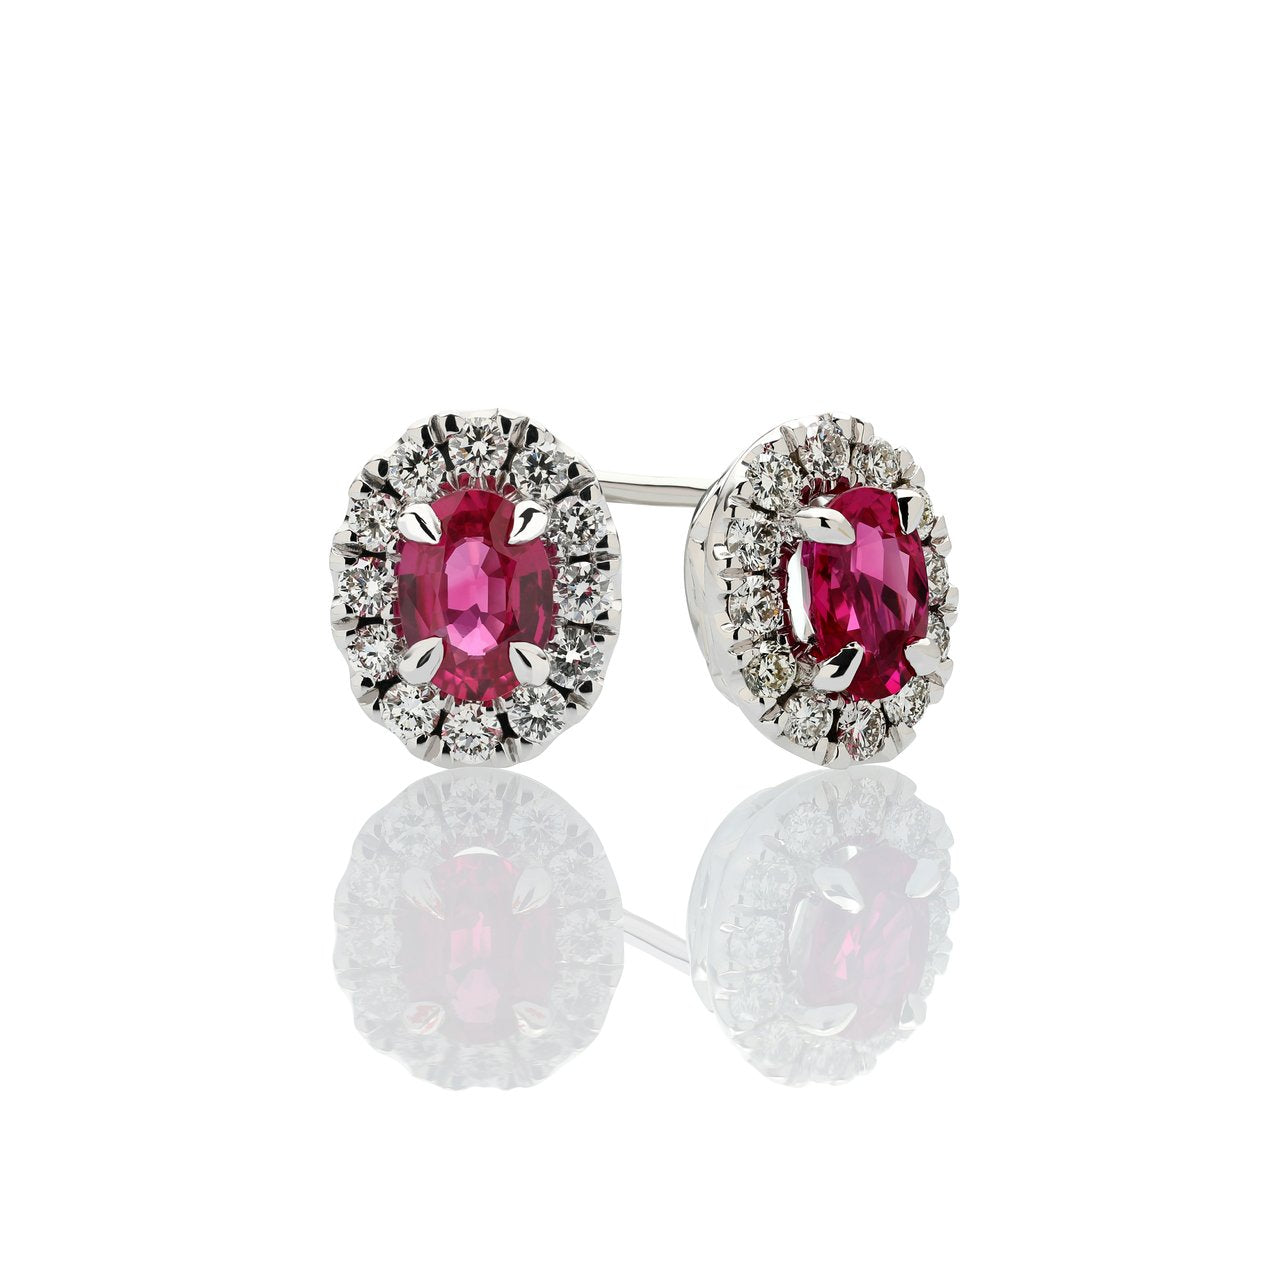 Sabel Collection 14K White Gold Oval Ruby and Diamond Stud Earrings